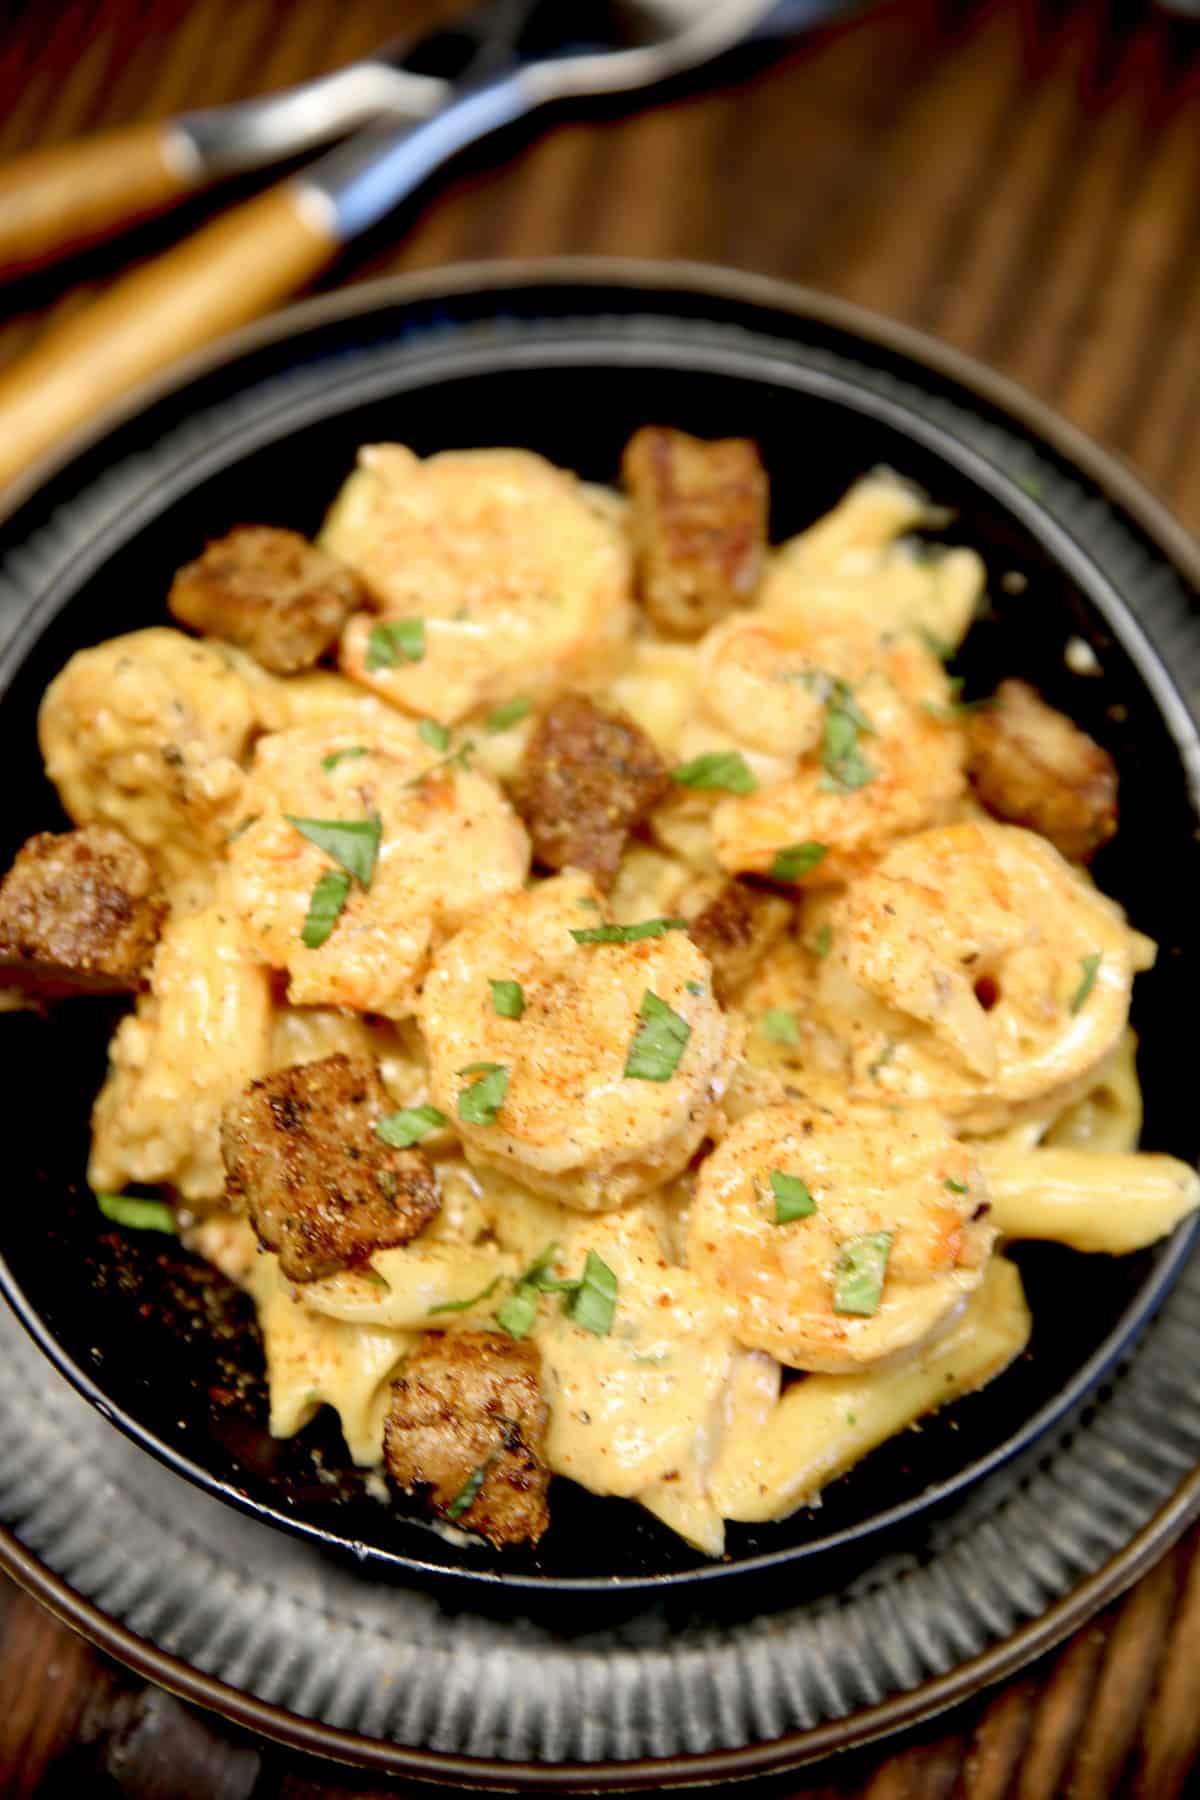 Bowl of pasta with steak and shrimp.